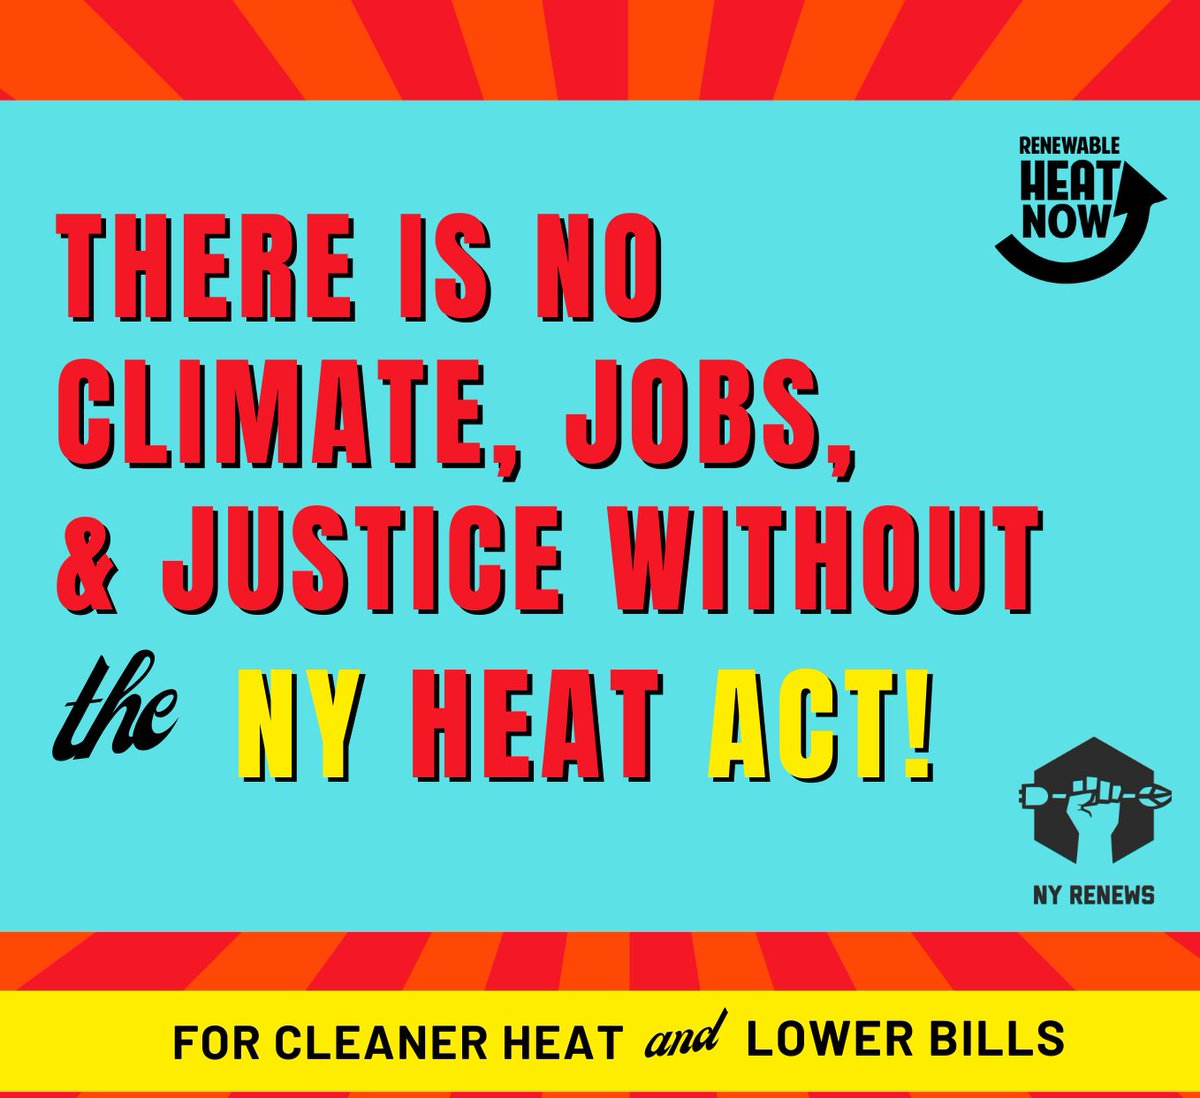 The #NYHEAT Act is in play in the budget! @GovKathyHochul included key portions of #NYHEAT in her budget proposal and now the ball is in the legislature's court! Can we count on you to pass the FULL #NYHEAT Act? @CarlHeastie @DeborahJGlick @kenzebrowski_ny